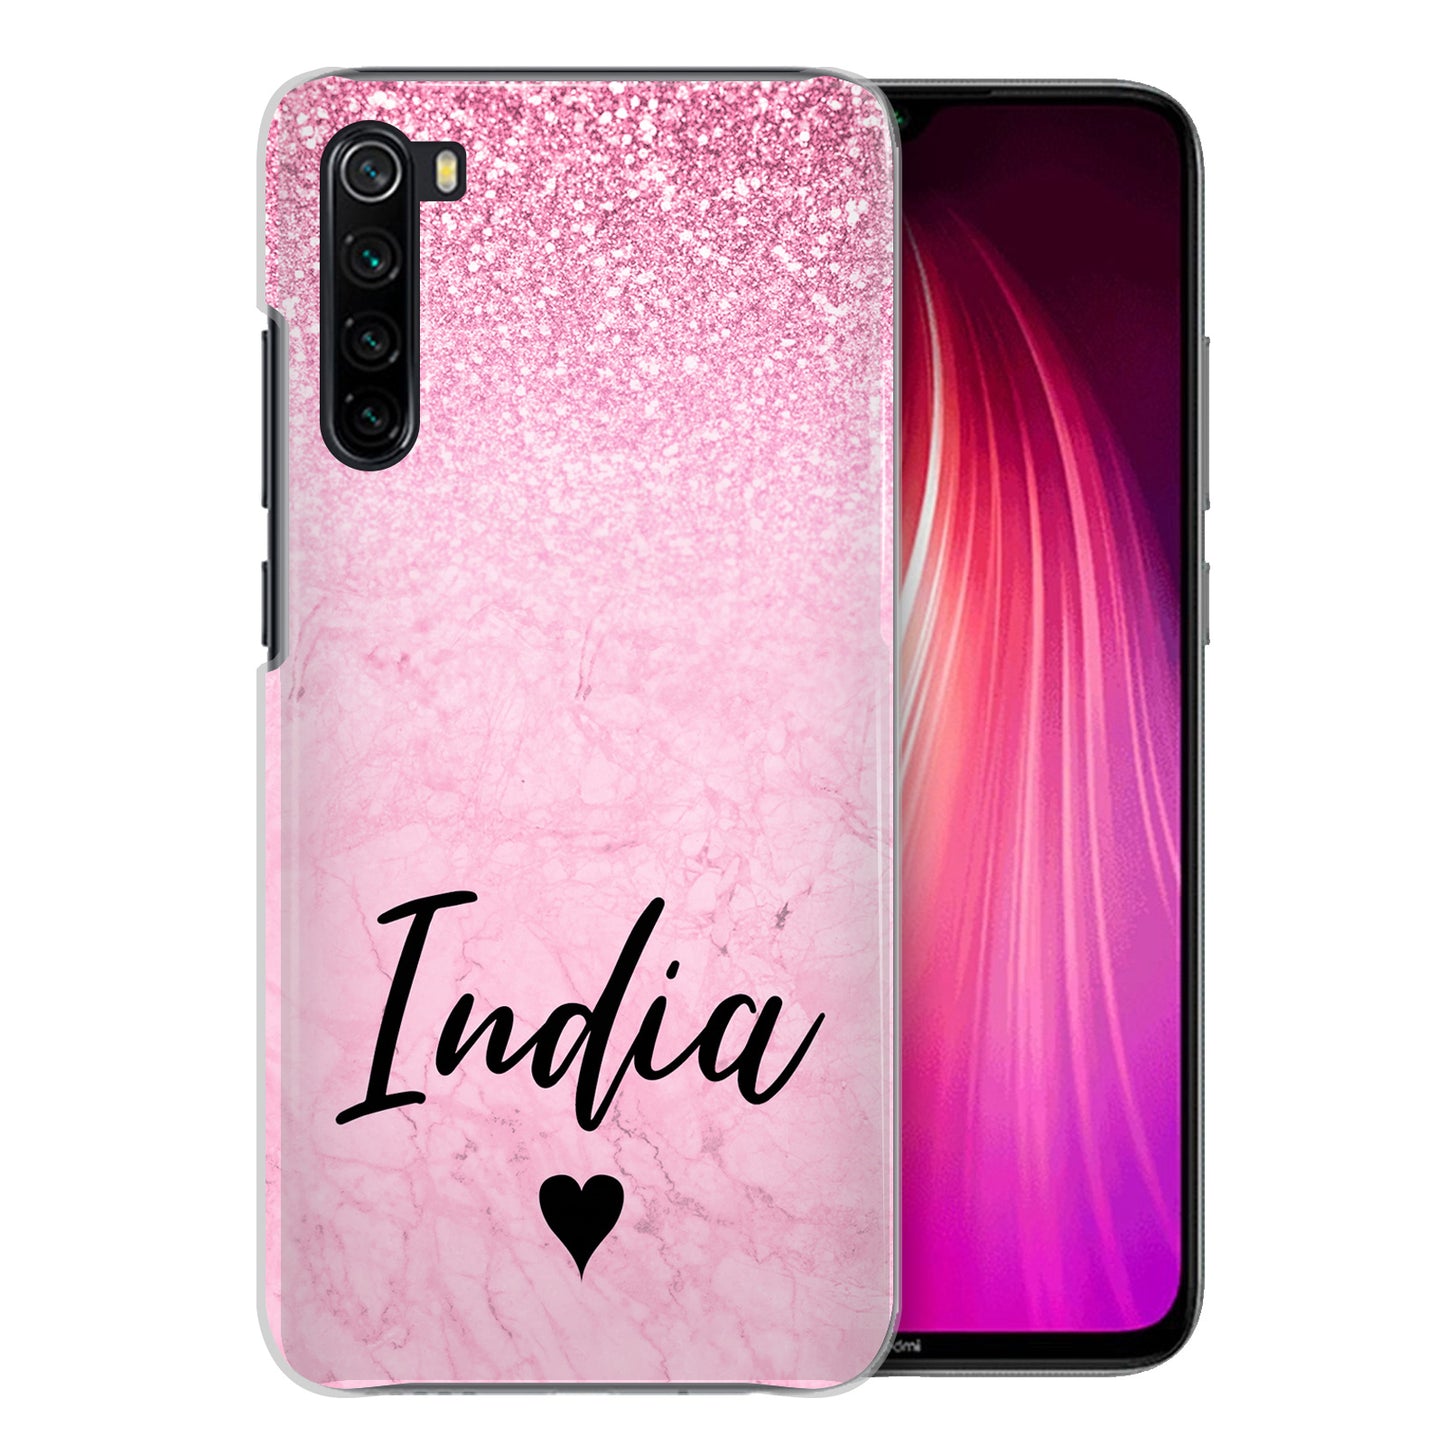 Personalised Xiaomi Hard Case - Pink Marble Fade & Black Heart Name